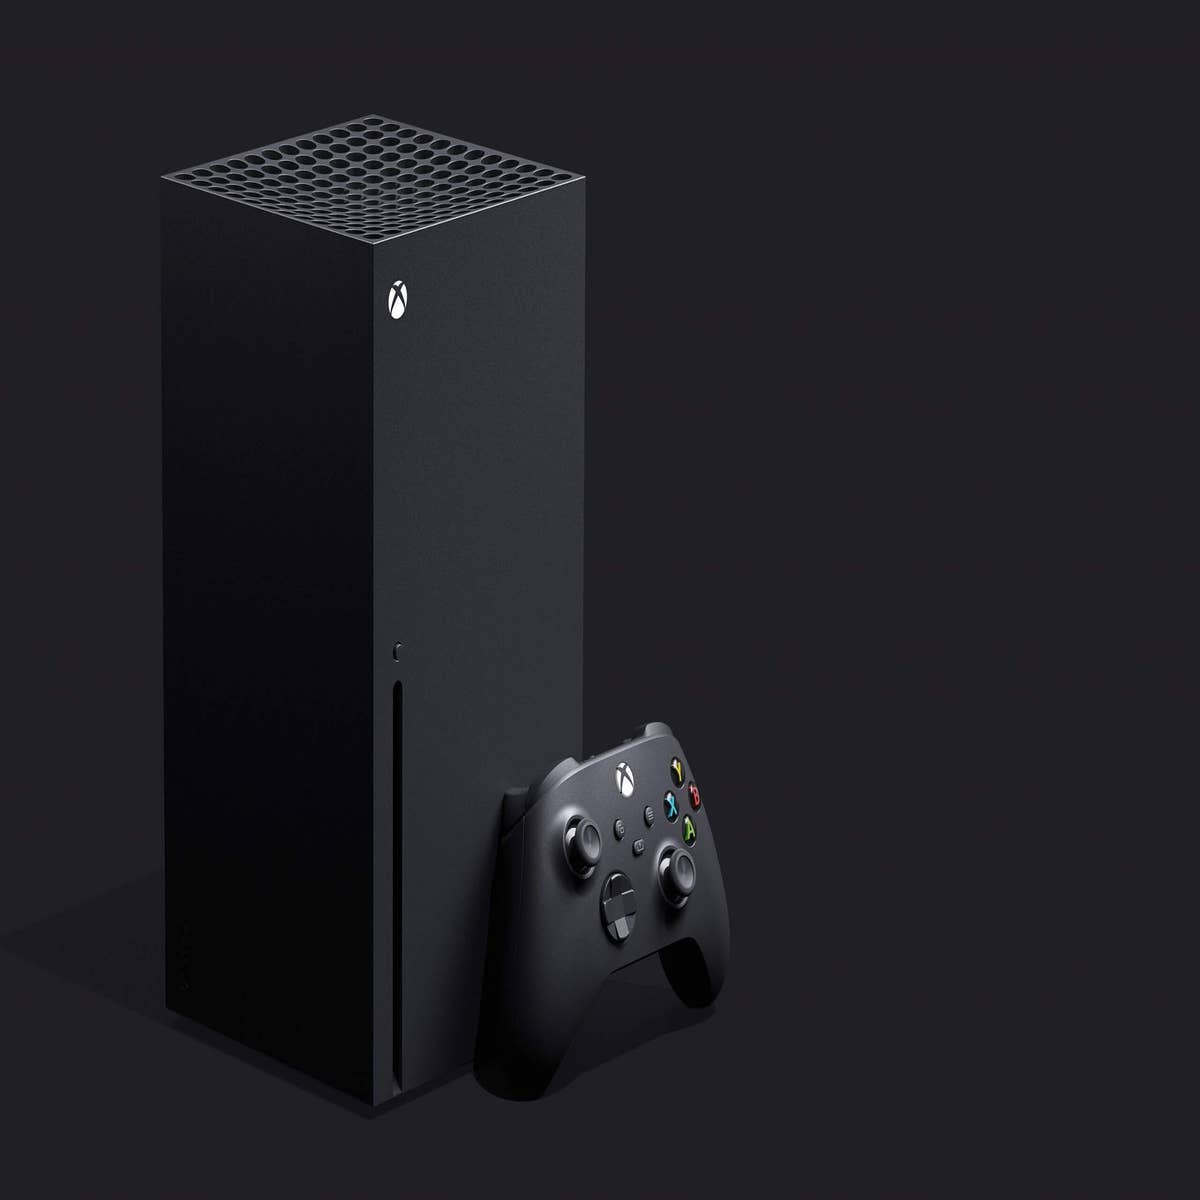 Xbox Series X vs Xbox Series S: which console should you buy?